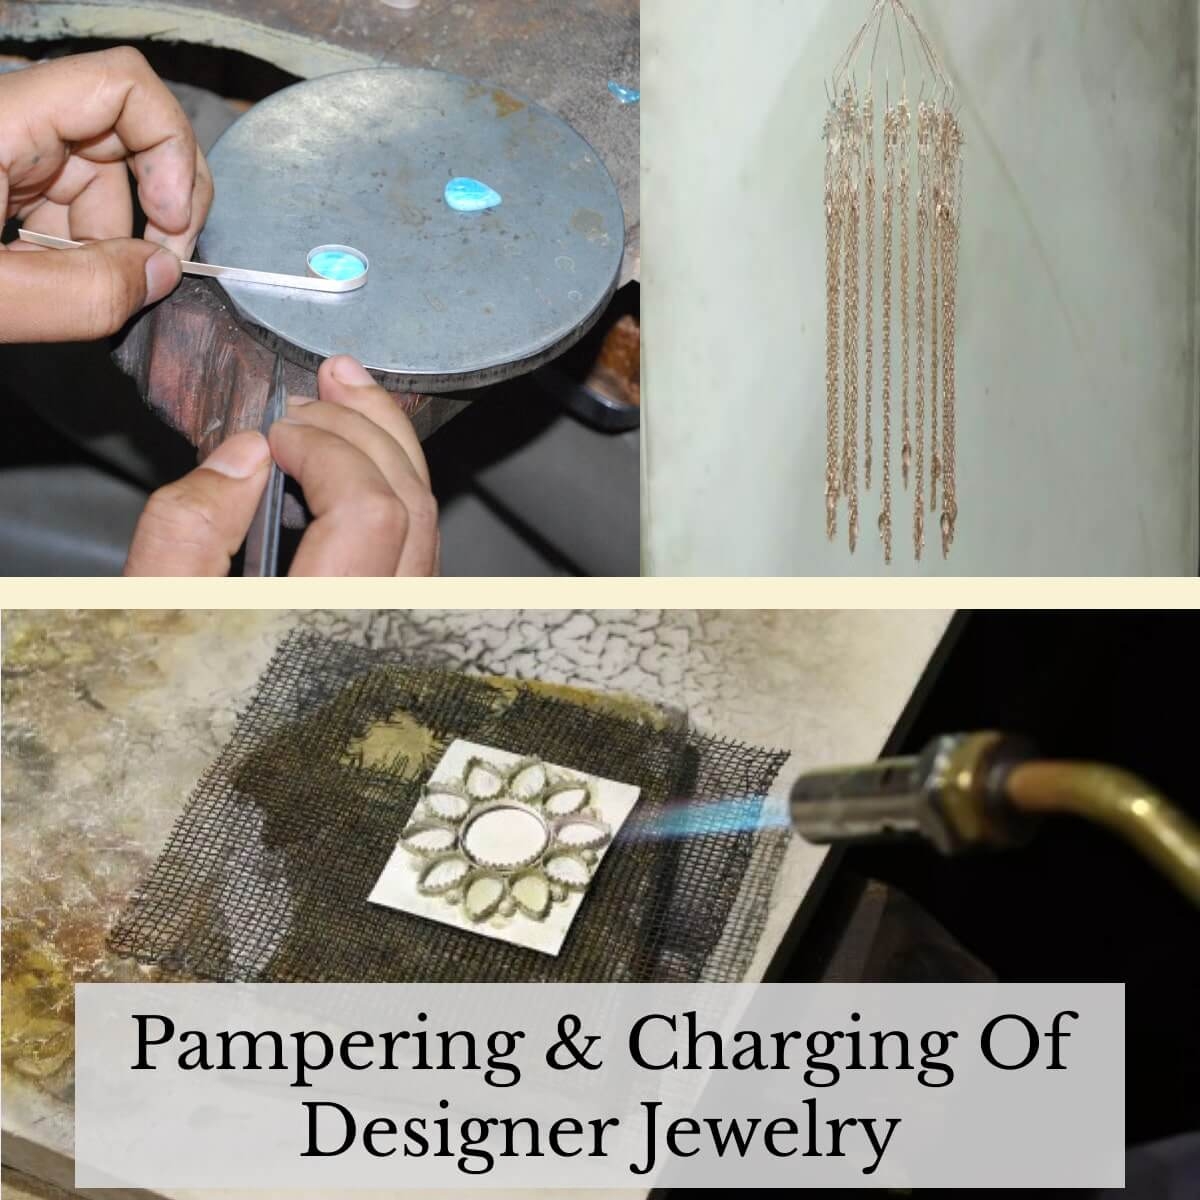 How to Cleanse and Charge Designer Jewelry